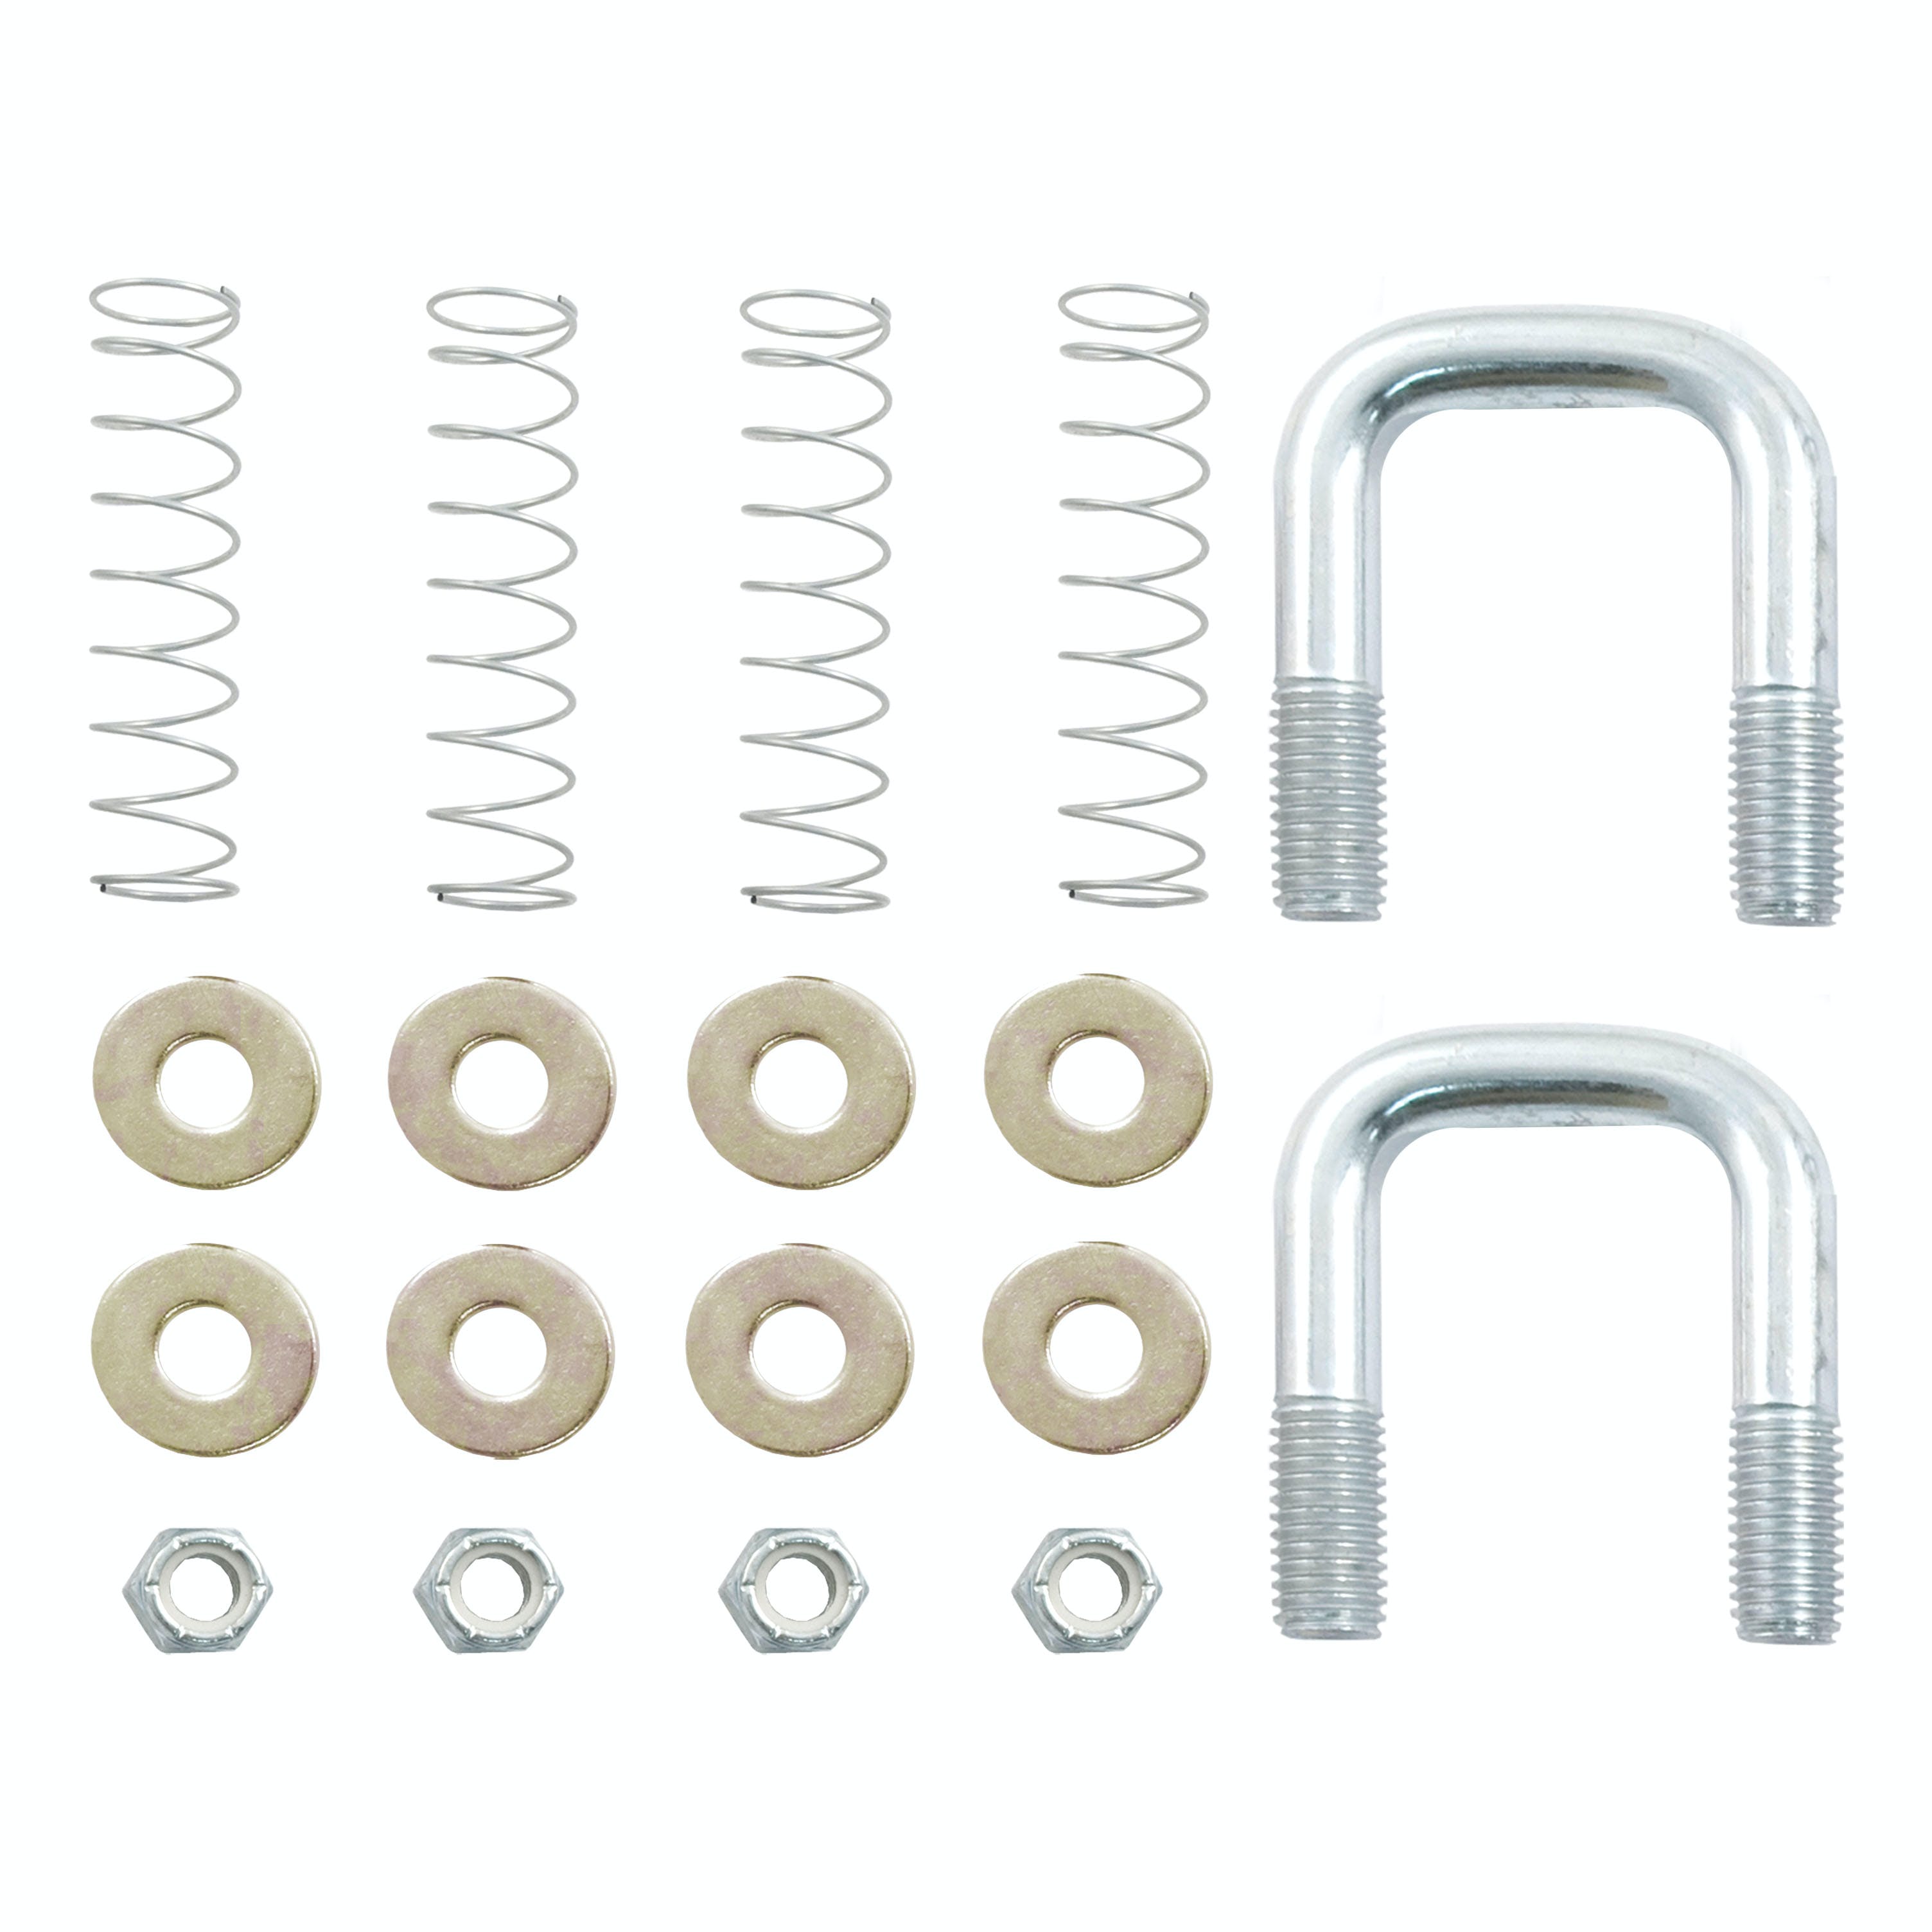 CURT 19254 Replacement Double Lock EZr Safety Chain Anchor Kit